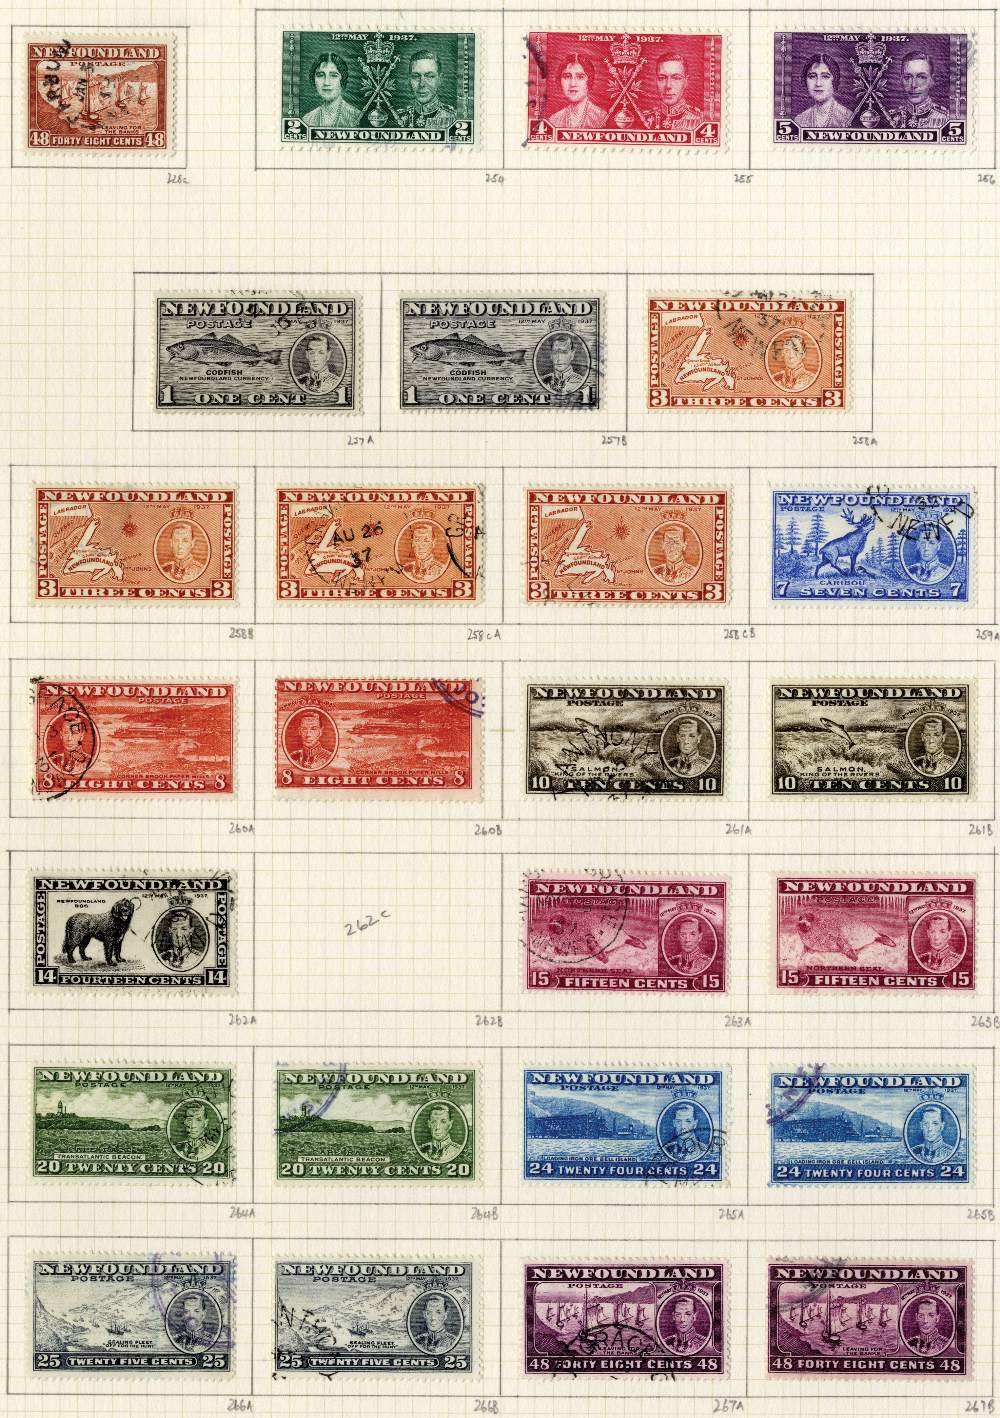 Collections and Miscellaneous. 1937-52 used collection of BNA/Atlantic on Philatelic leaves with